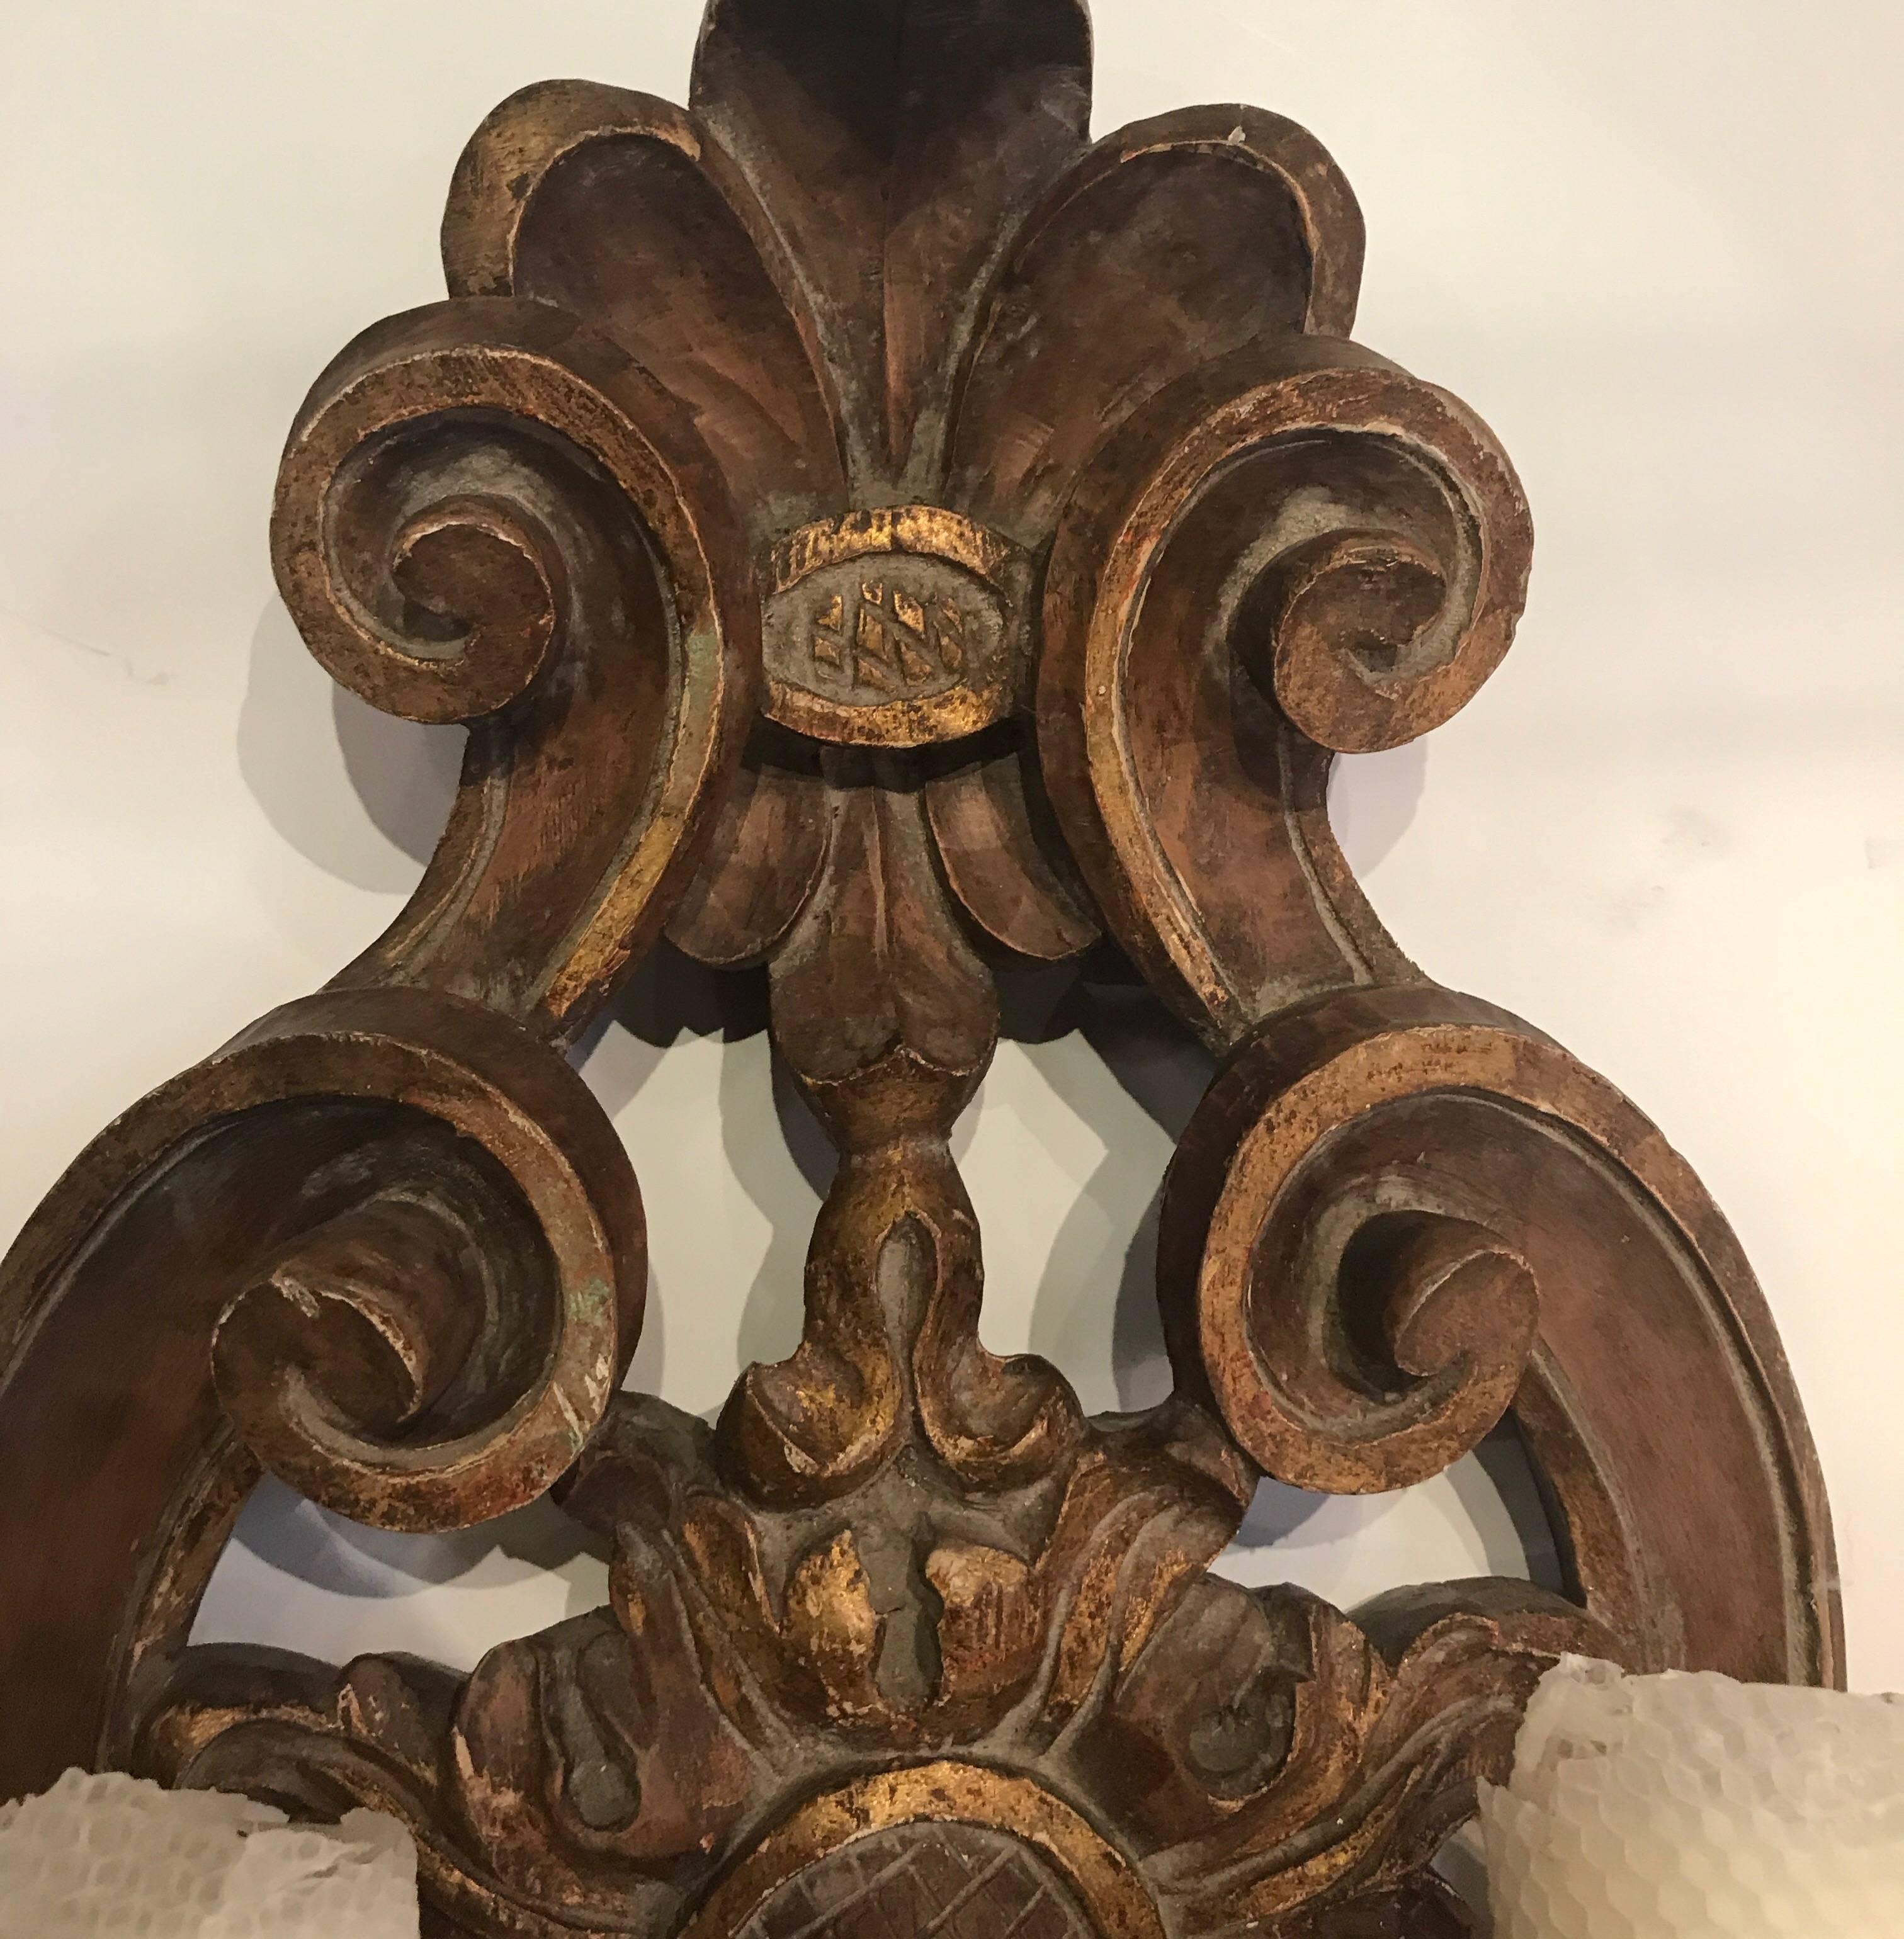 Exceptionally carved all wood and hand-forged iron arm sconces. These sconces are not wired for electricity. There are some original gilt accents showing some wear but all original.